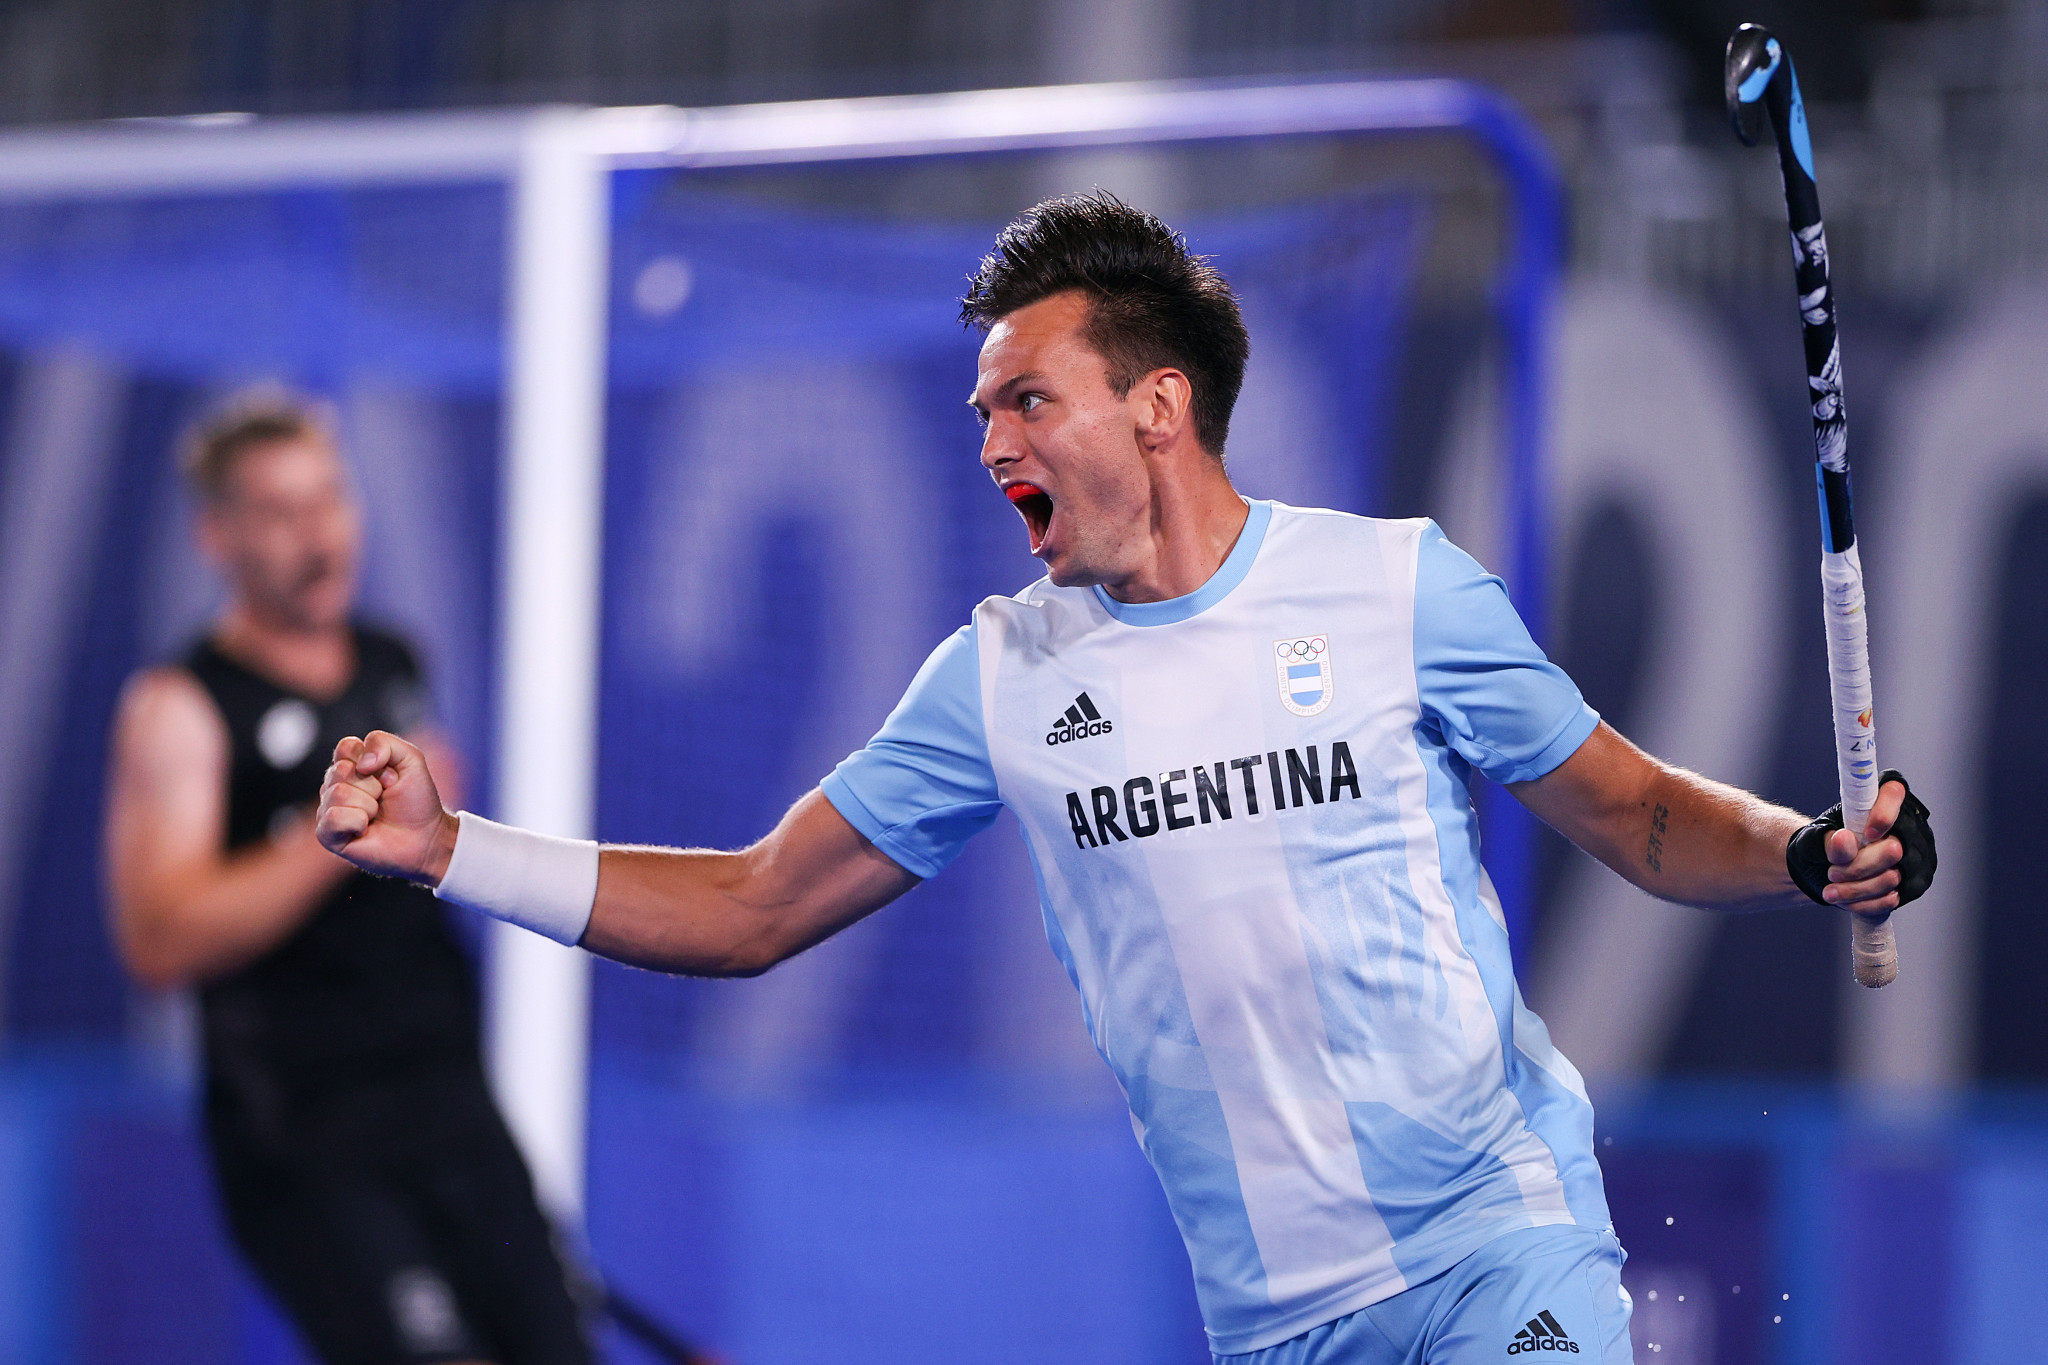 Argentina won a shoot-out against South Africa in Buenos Aires ©Getty Images